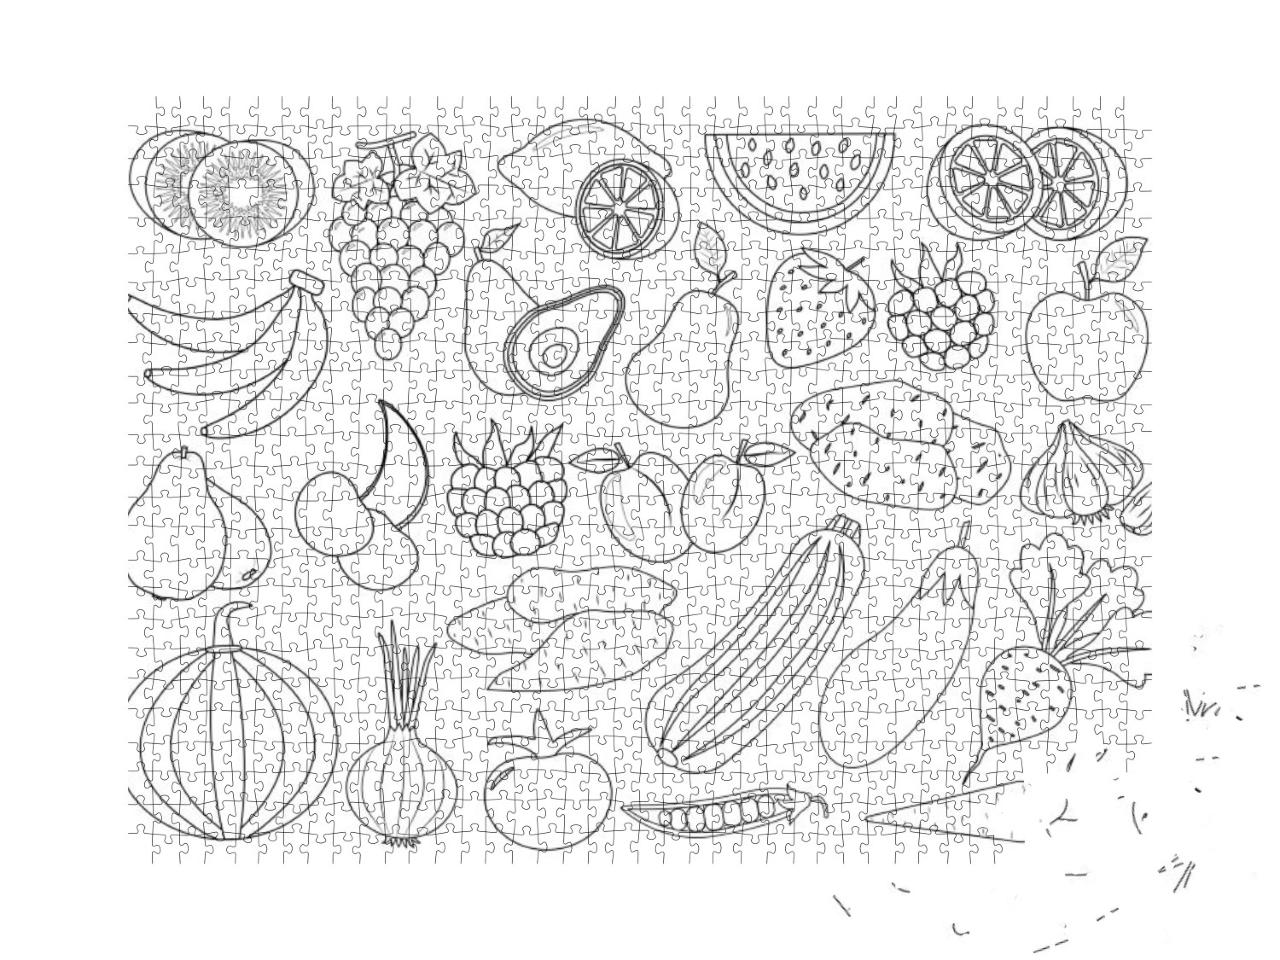 Coloring Book Page. Fruits, Berries & Vegetables Cartoon... Jigsaw Puzzle with 1000 pieces